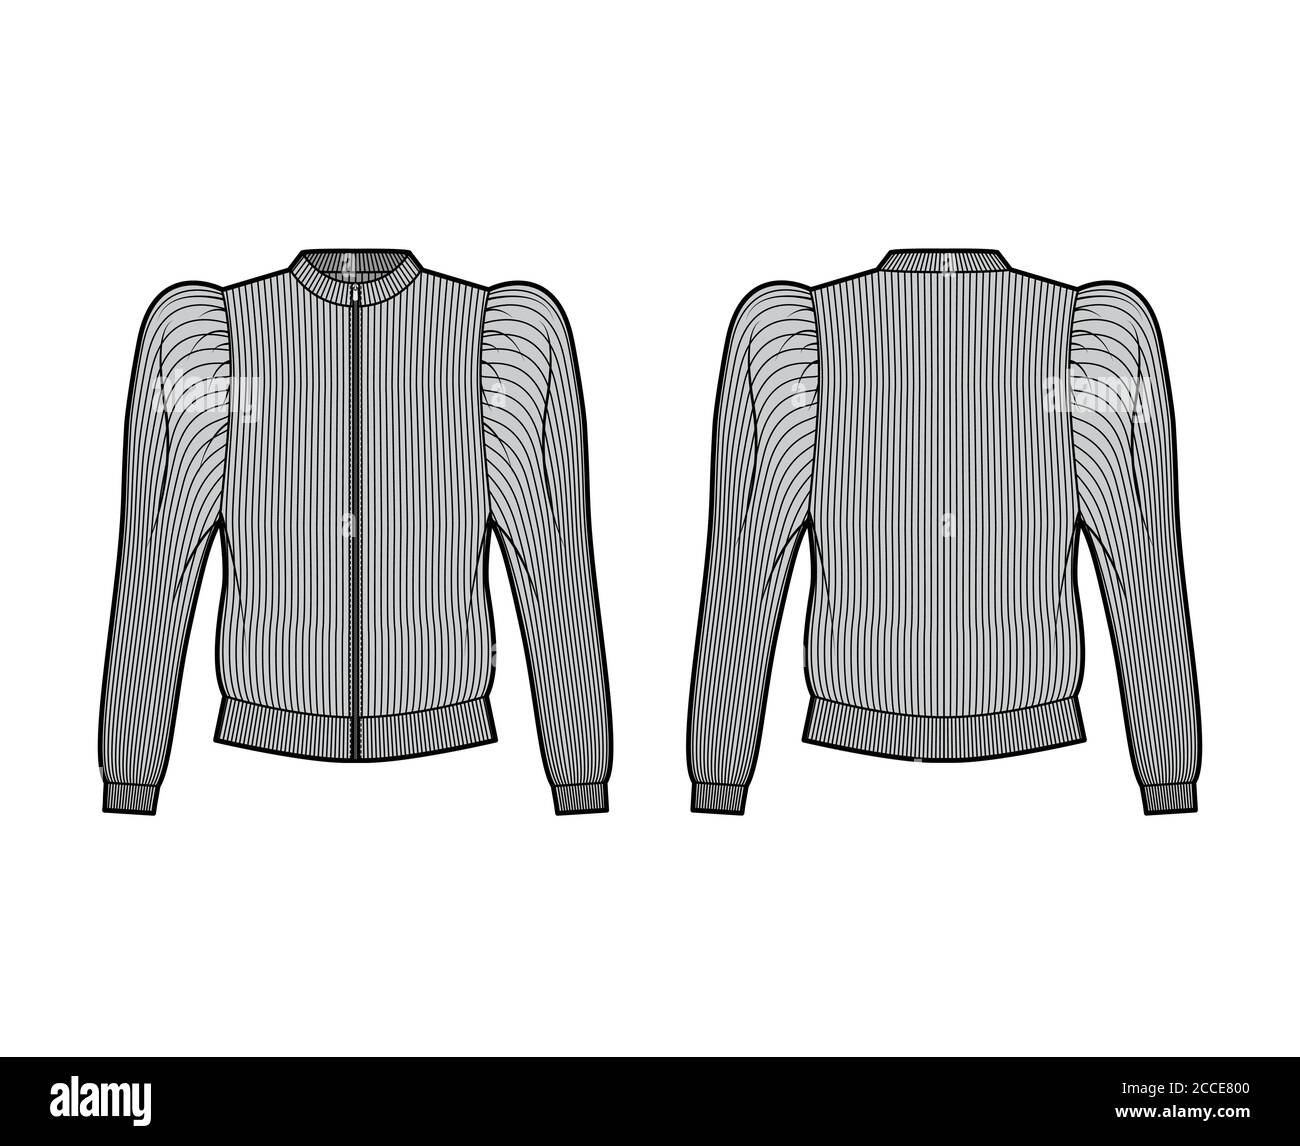 Zip-up ribbed cotton-jersey sweatshirt technical fashion illustration with gathered, puffy long sleeves, relaxed fit. Flat jumper apparel template front, back grey color. Women men unisex top knit CAD Stock Vector